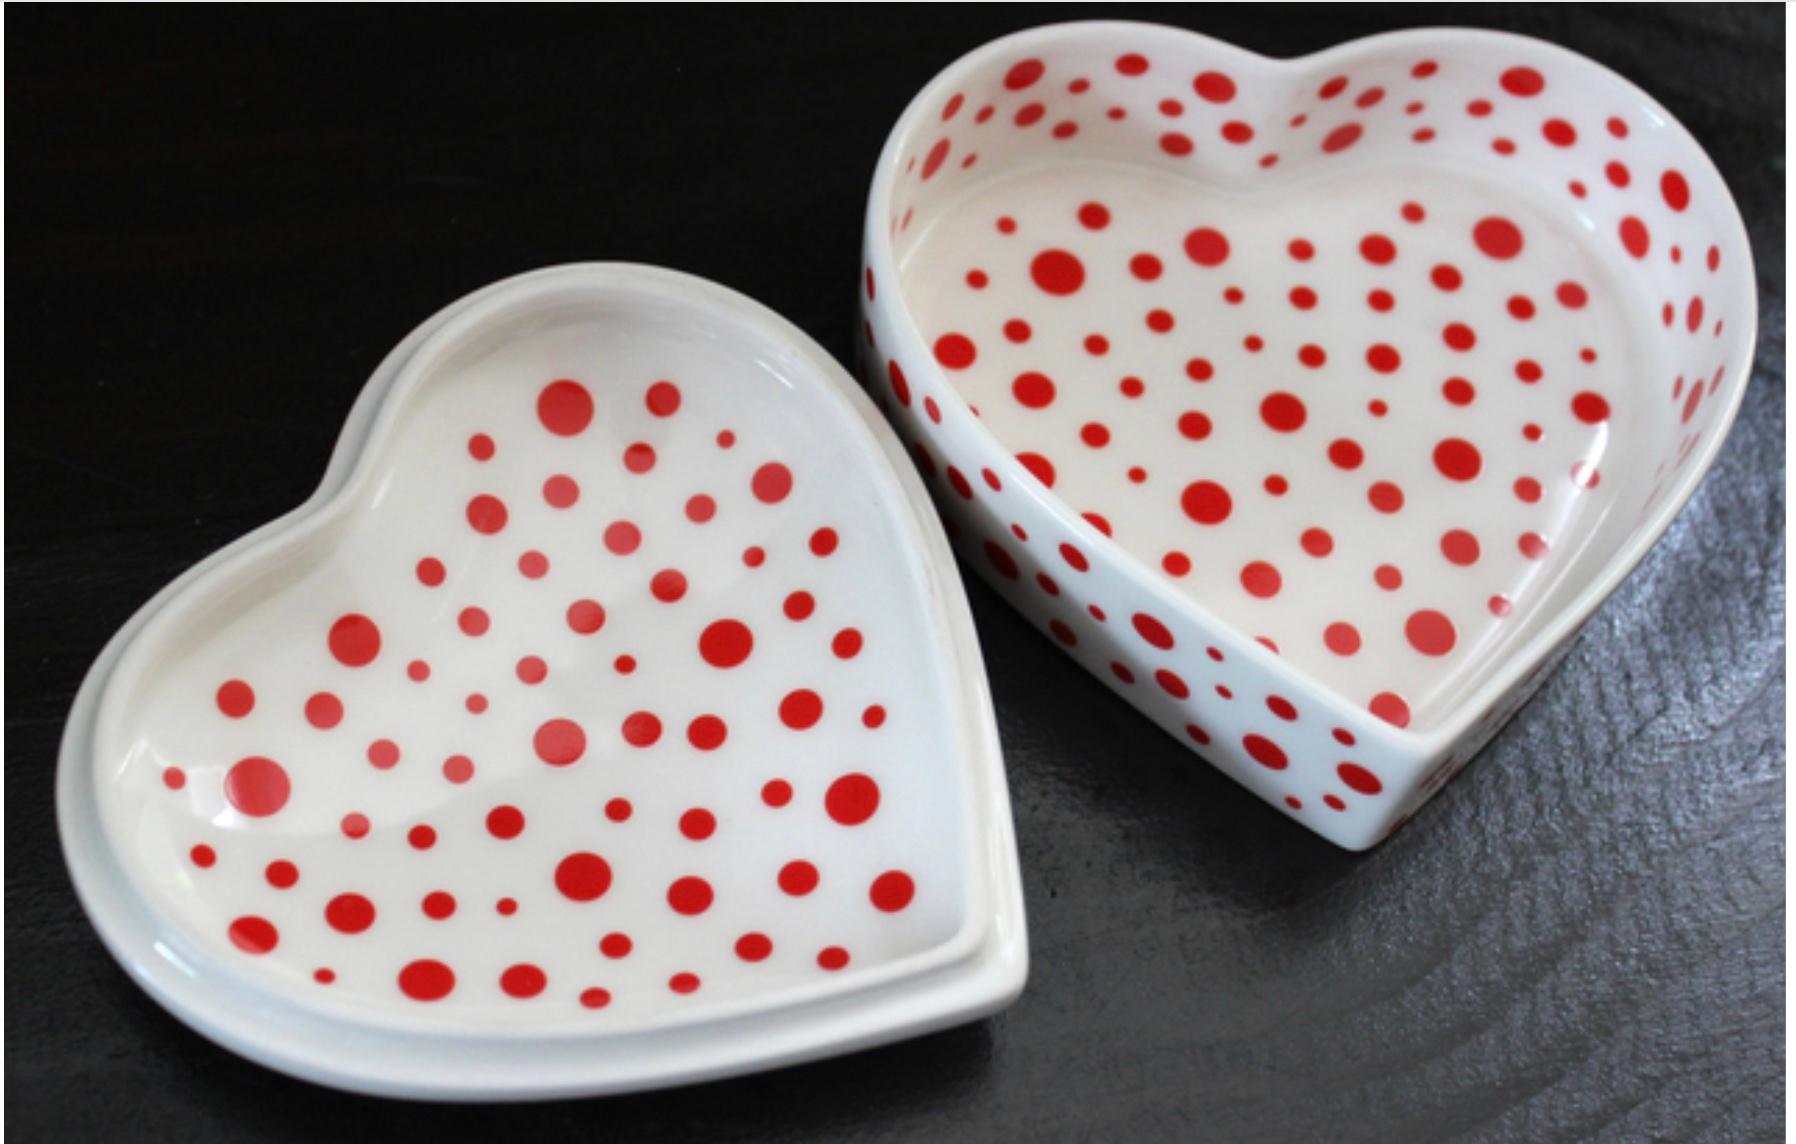 Yayoi Kusama
Love Forever, 2016
Ceramic (Porcelain) Dish and Cover
Stamped Yayoi Kusama on bottom
4 1/2 × 4 1/2 × 1 1/2 inches
Unframed
Limited edition (exact number created is unknown)

YAYOI Kusama Biography:
Yayoi Kusama's work has transcended